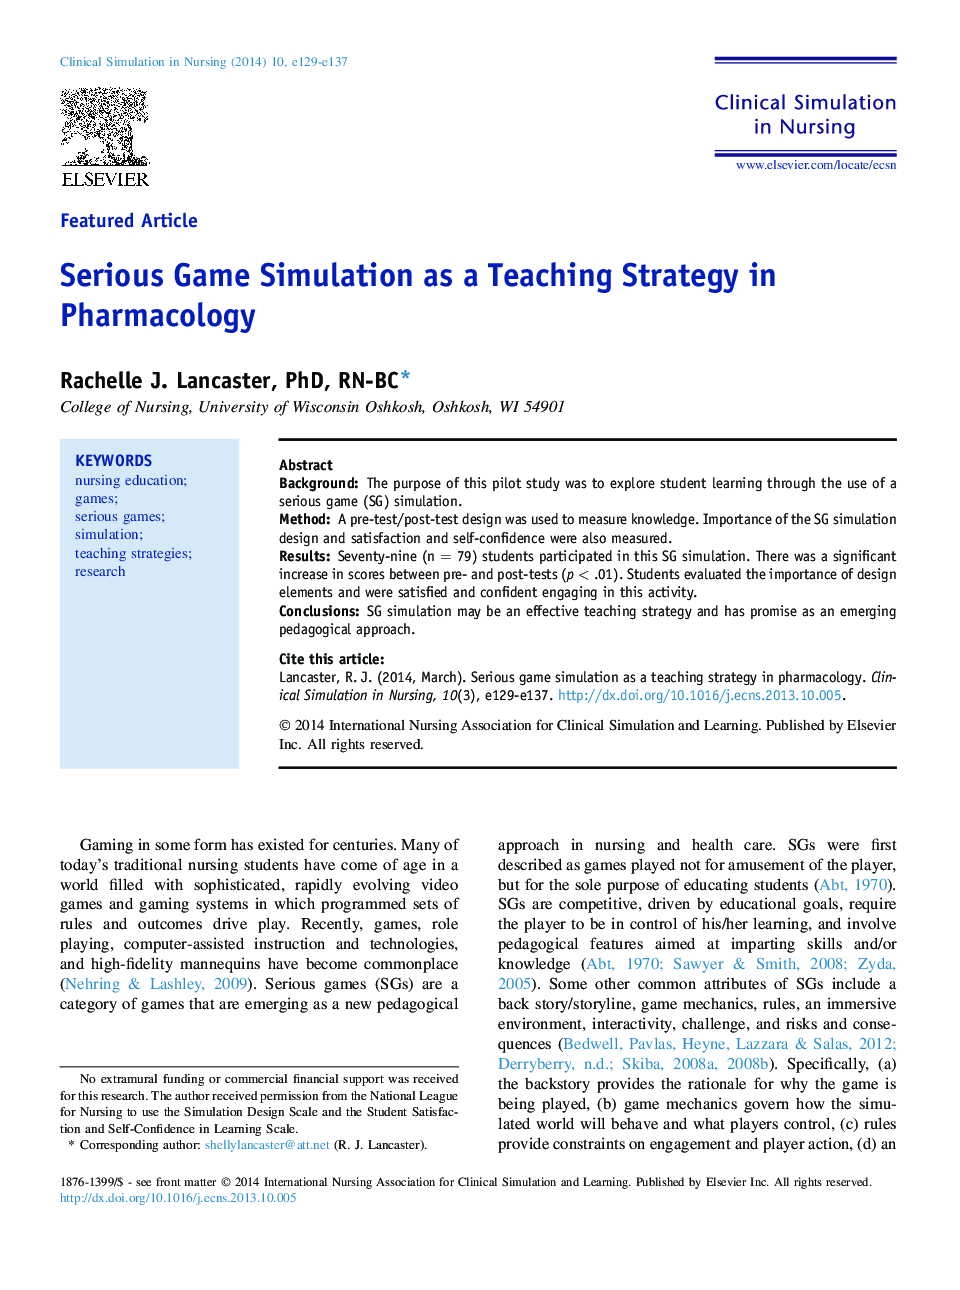 Serious Game Simulation as a Teaching Strategy in Pharmacology 